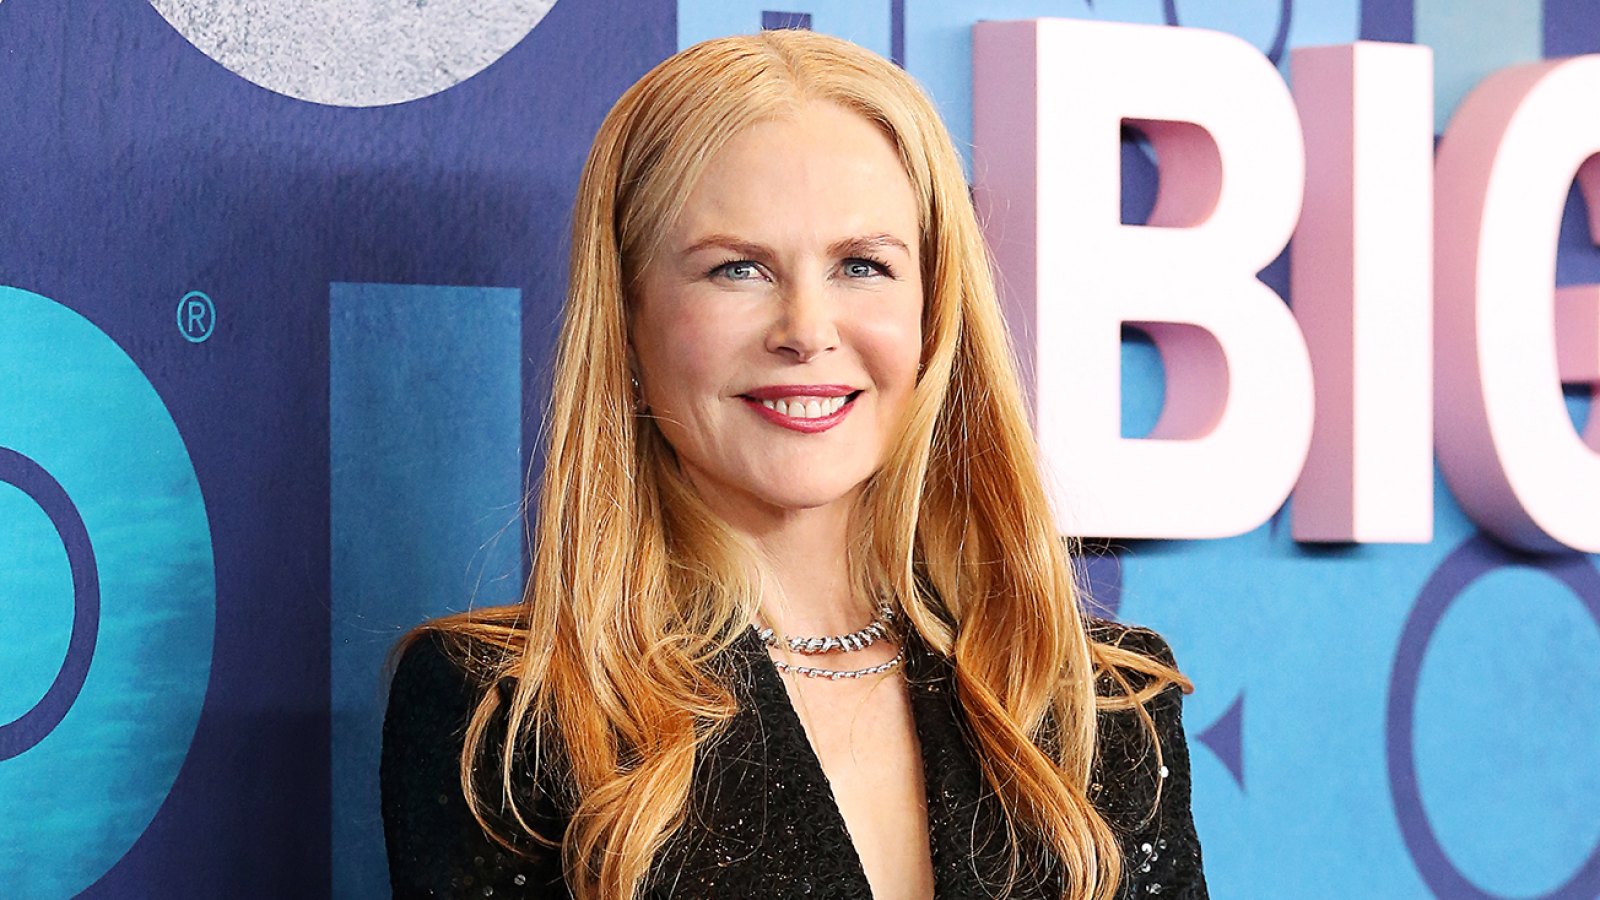 Nicole Kidman Says 'Big Little Lies' Season 3 Is Happening: We Will Be Bringing You a 3rd'